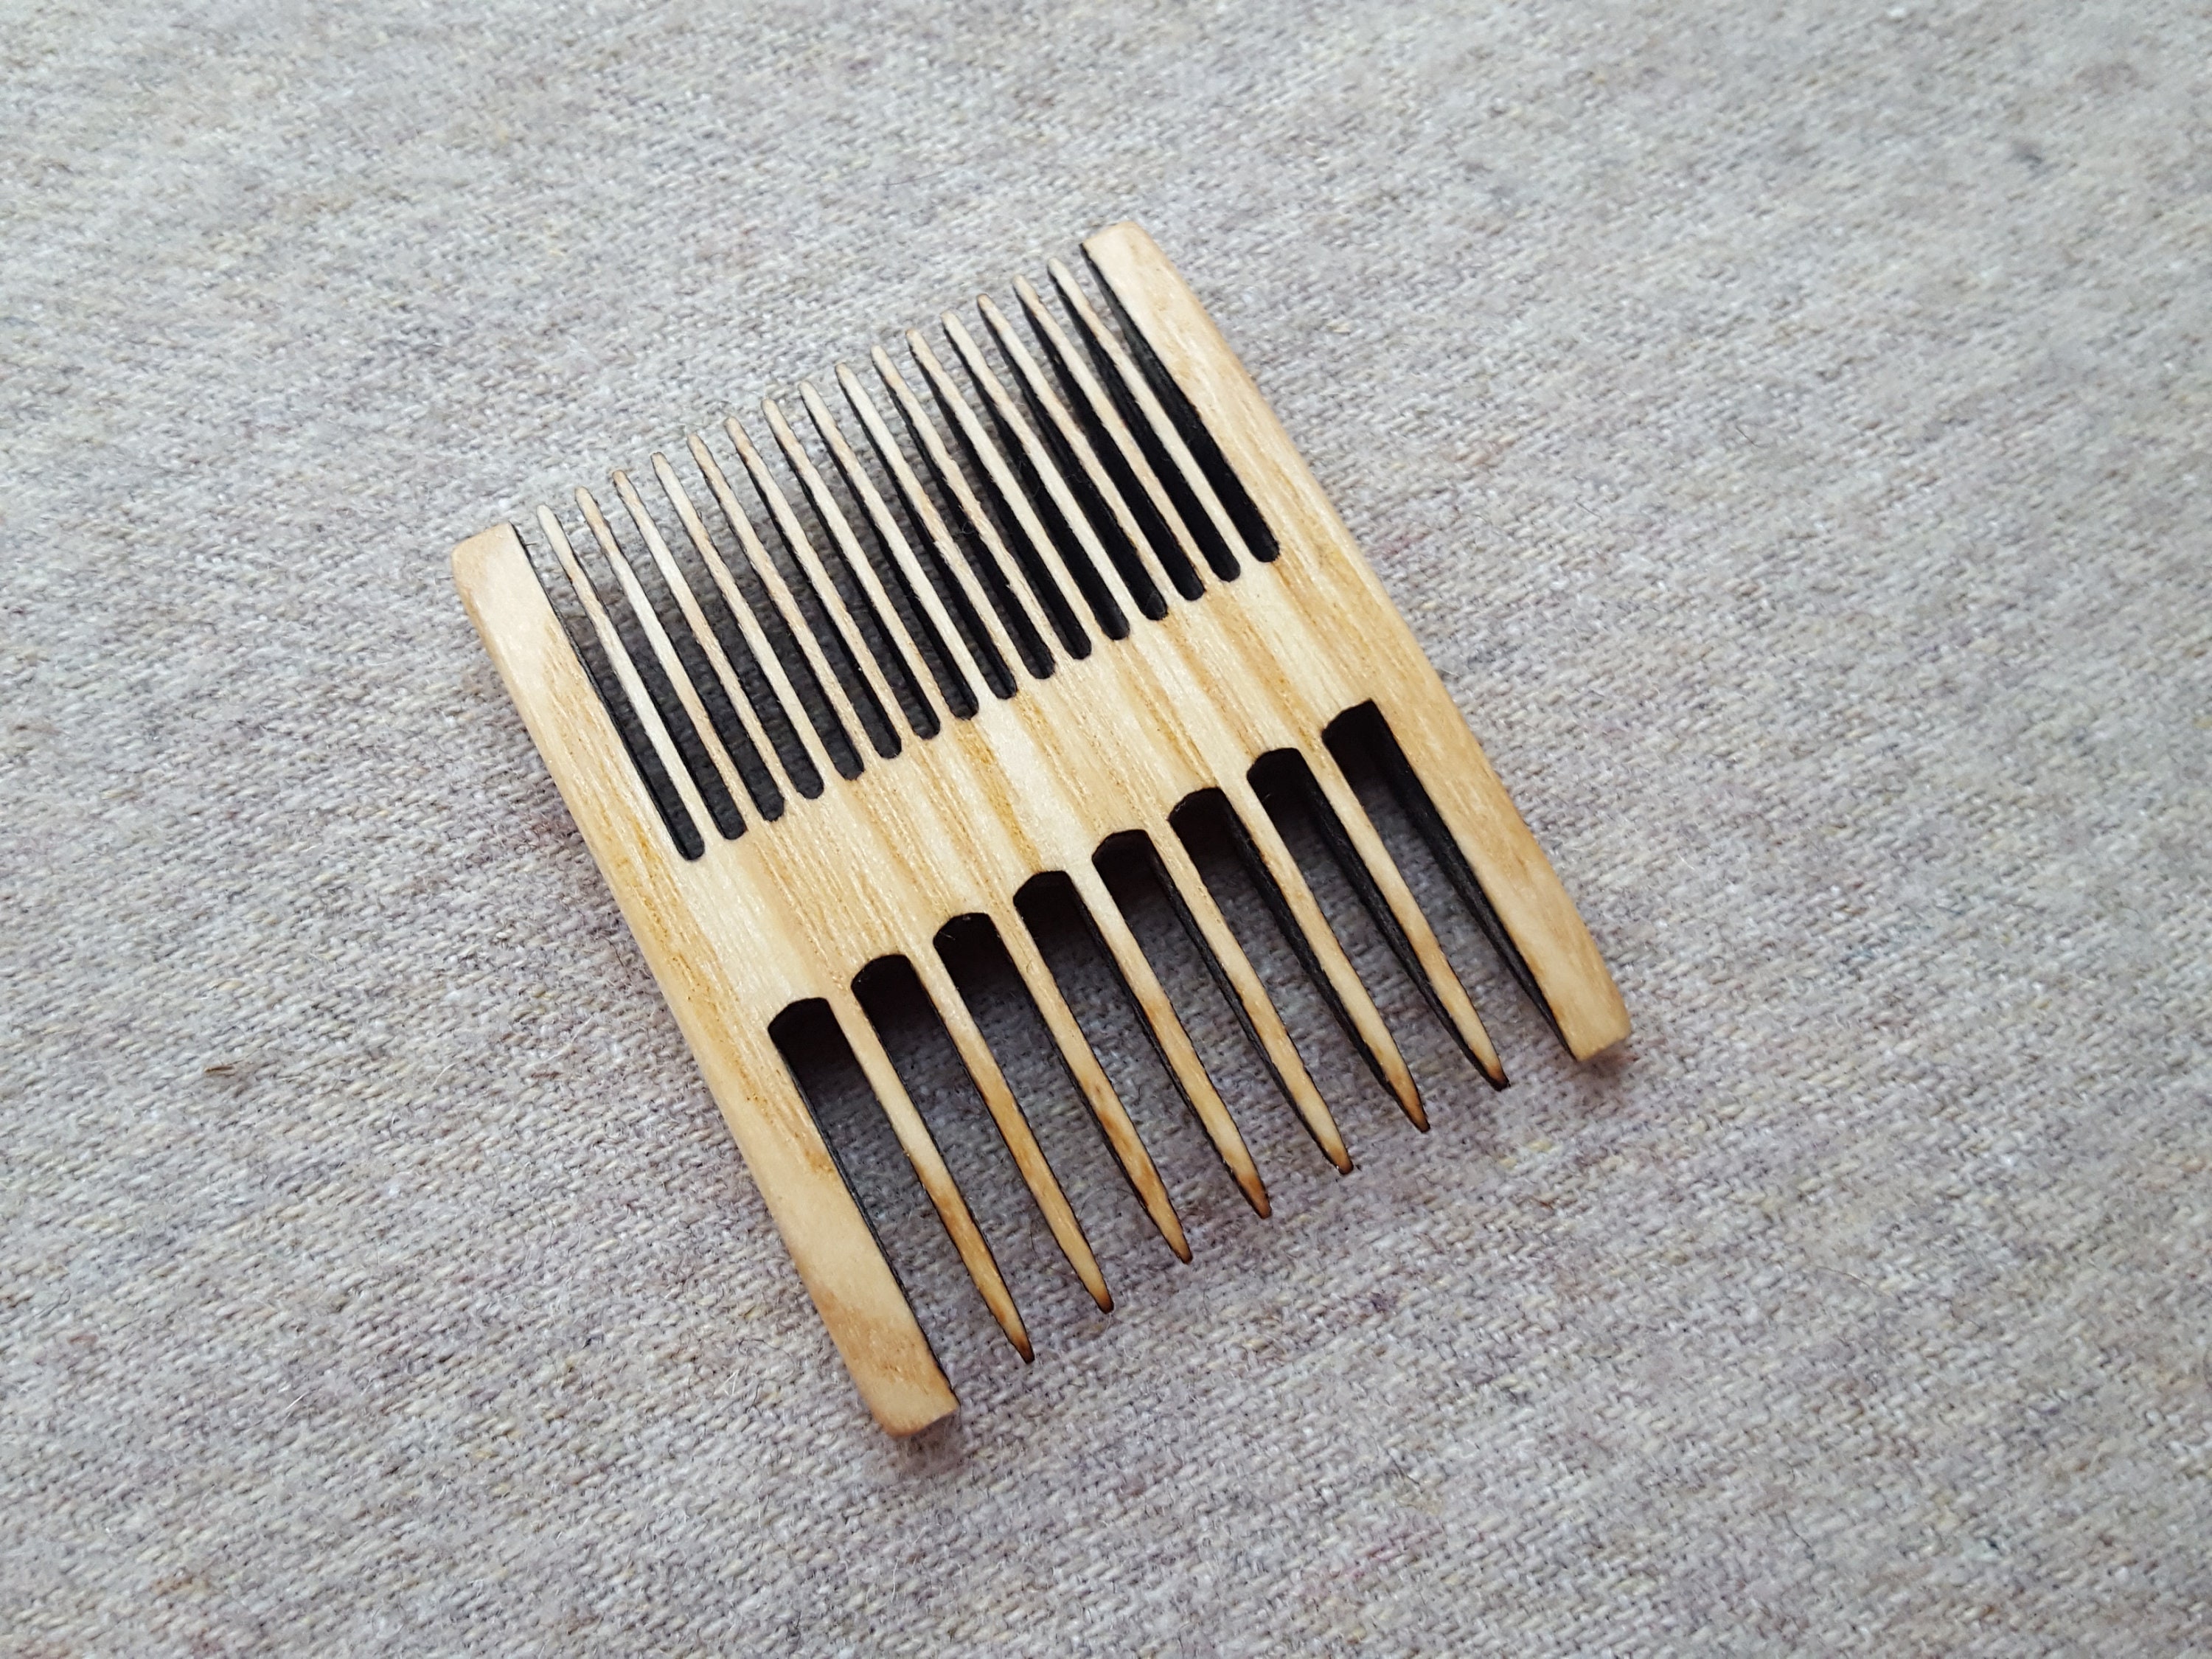 Medieval London wooden comb | Etsy